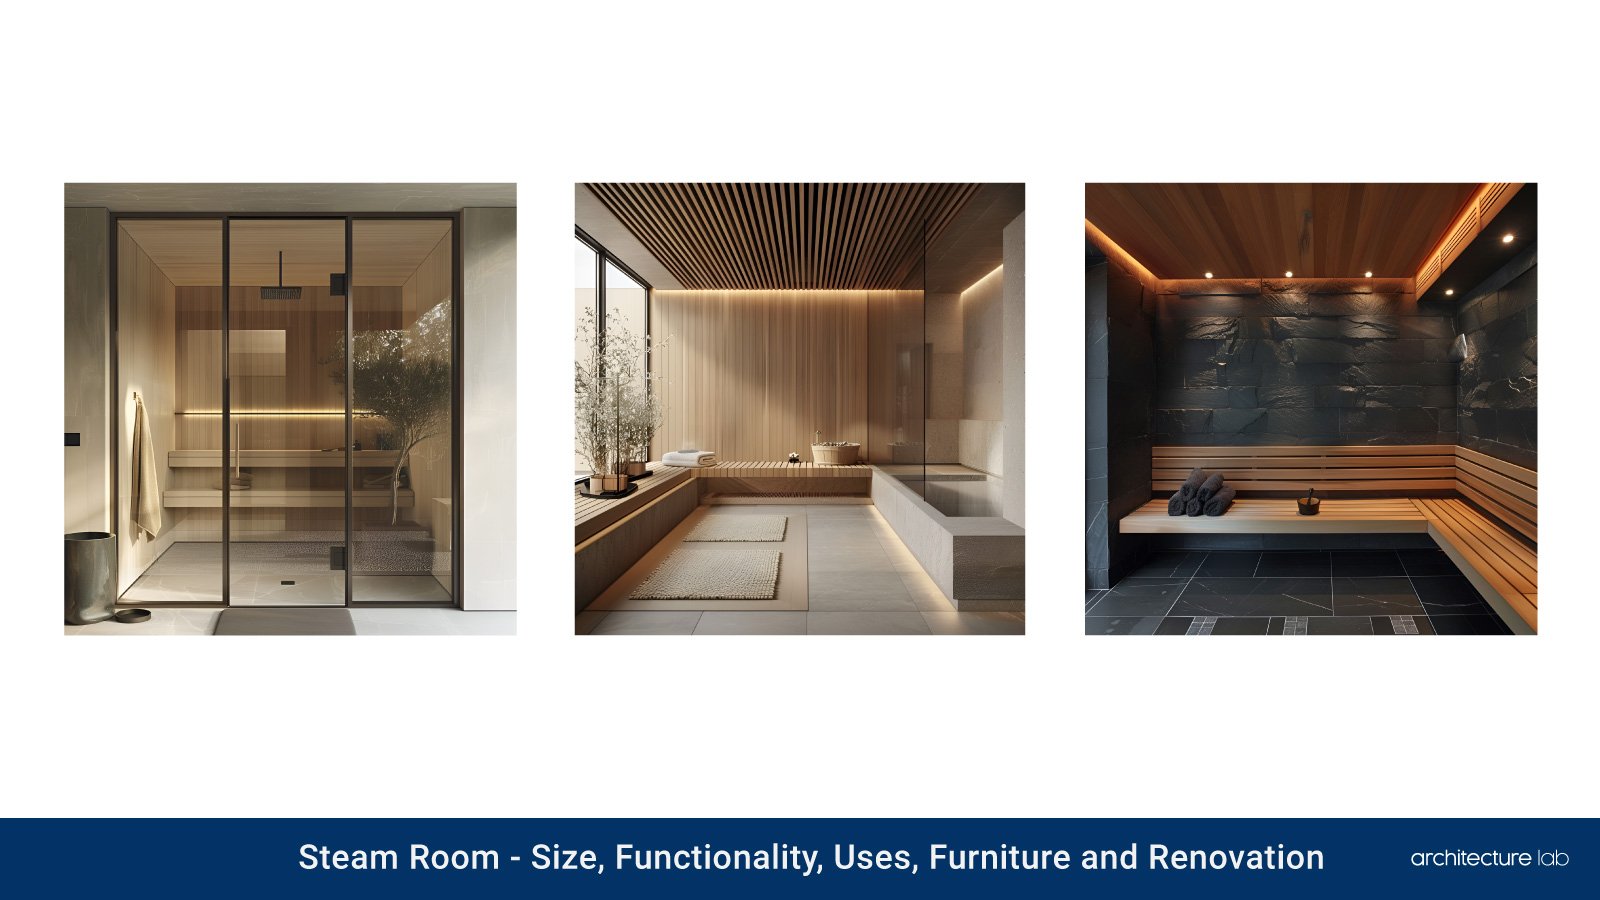 Steam room: size, functionality, uses, furniture and renovation